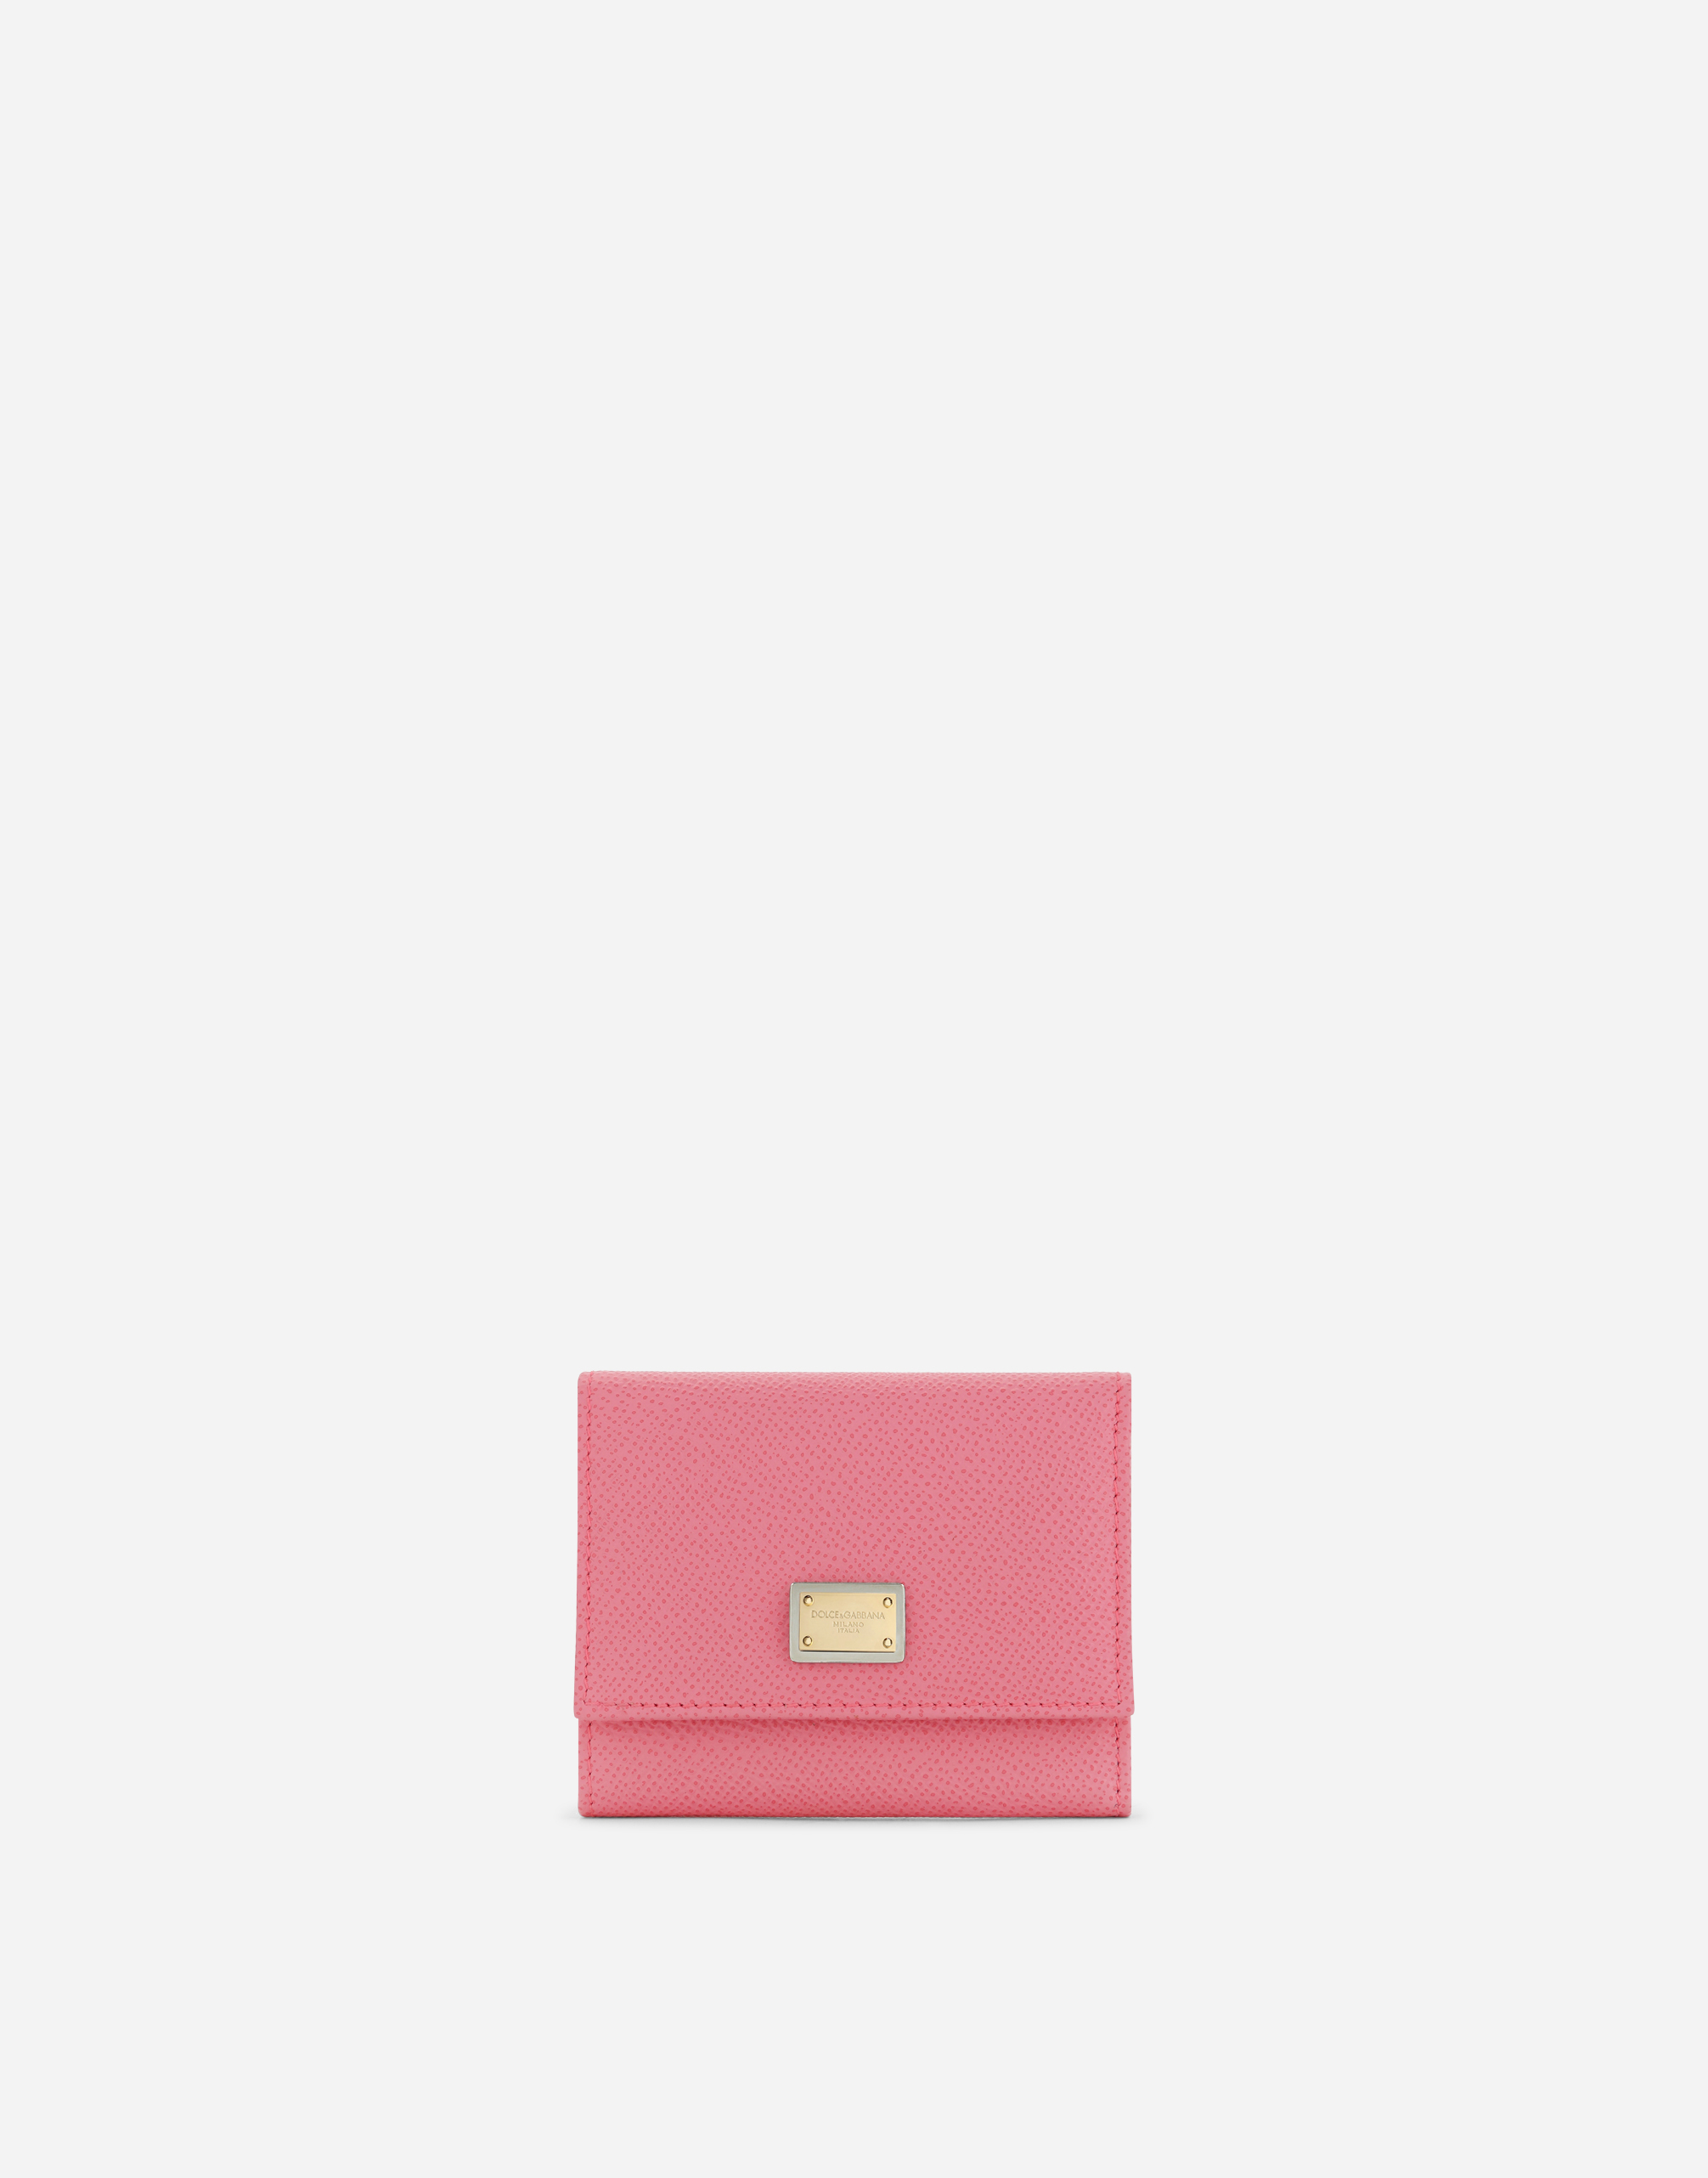 Dolce & Gabbana Calfskin Wallet With Branded Plate In Pink